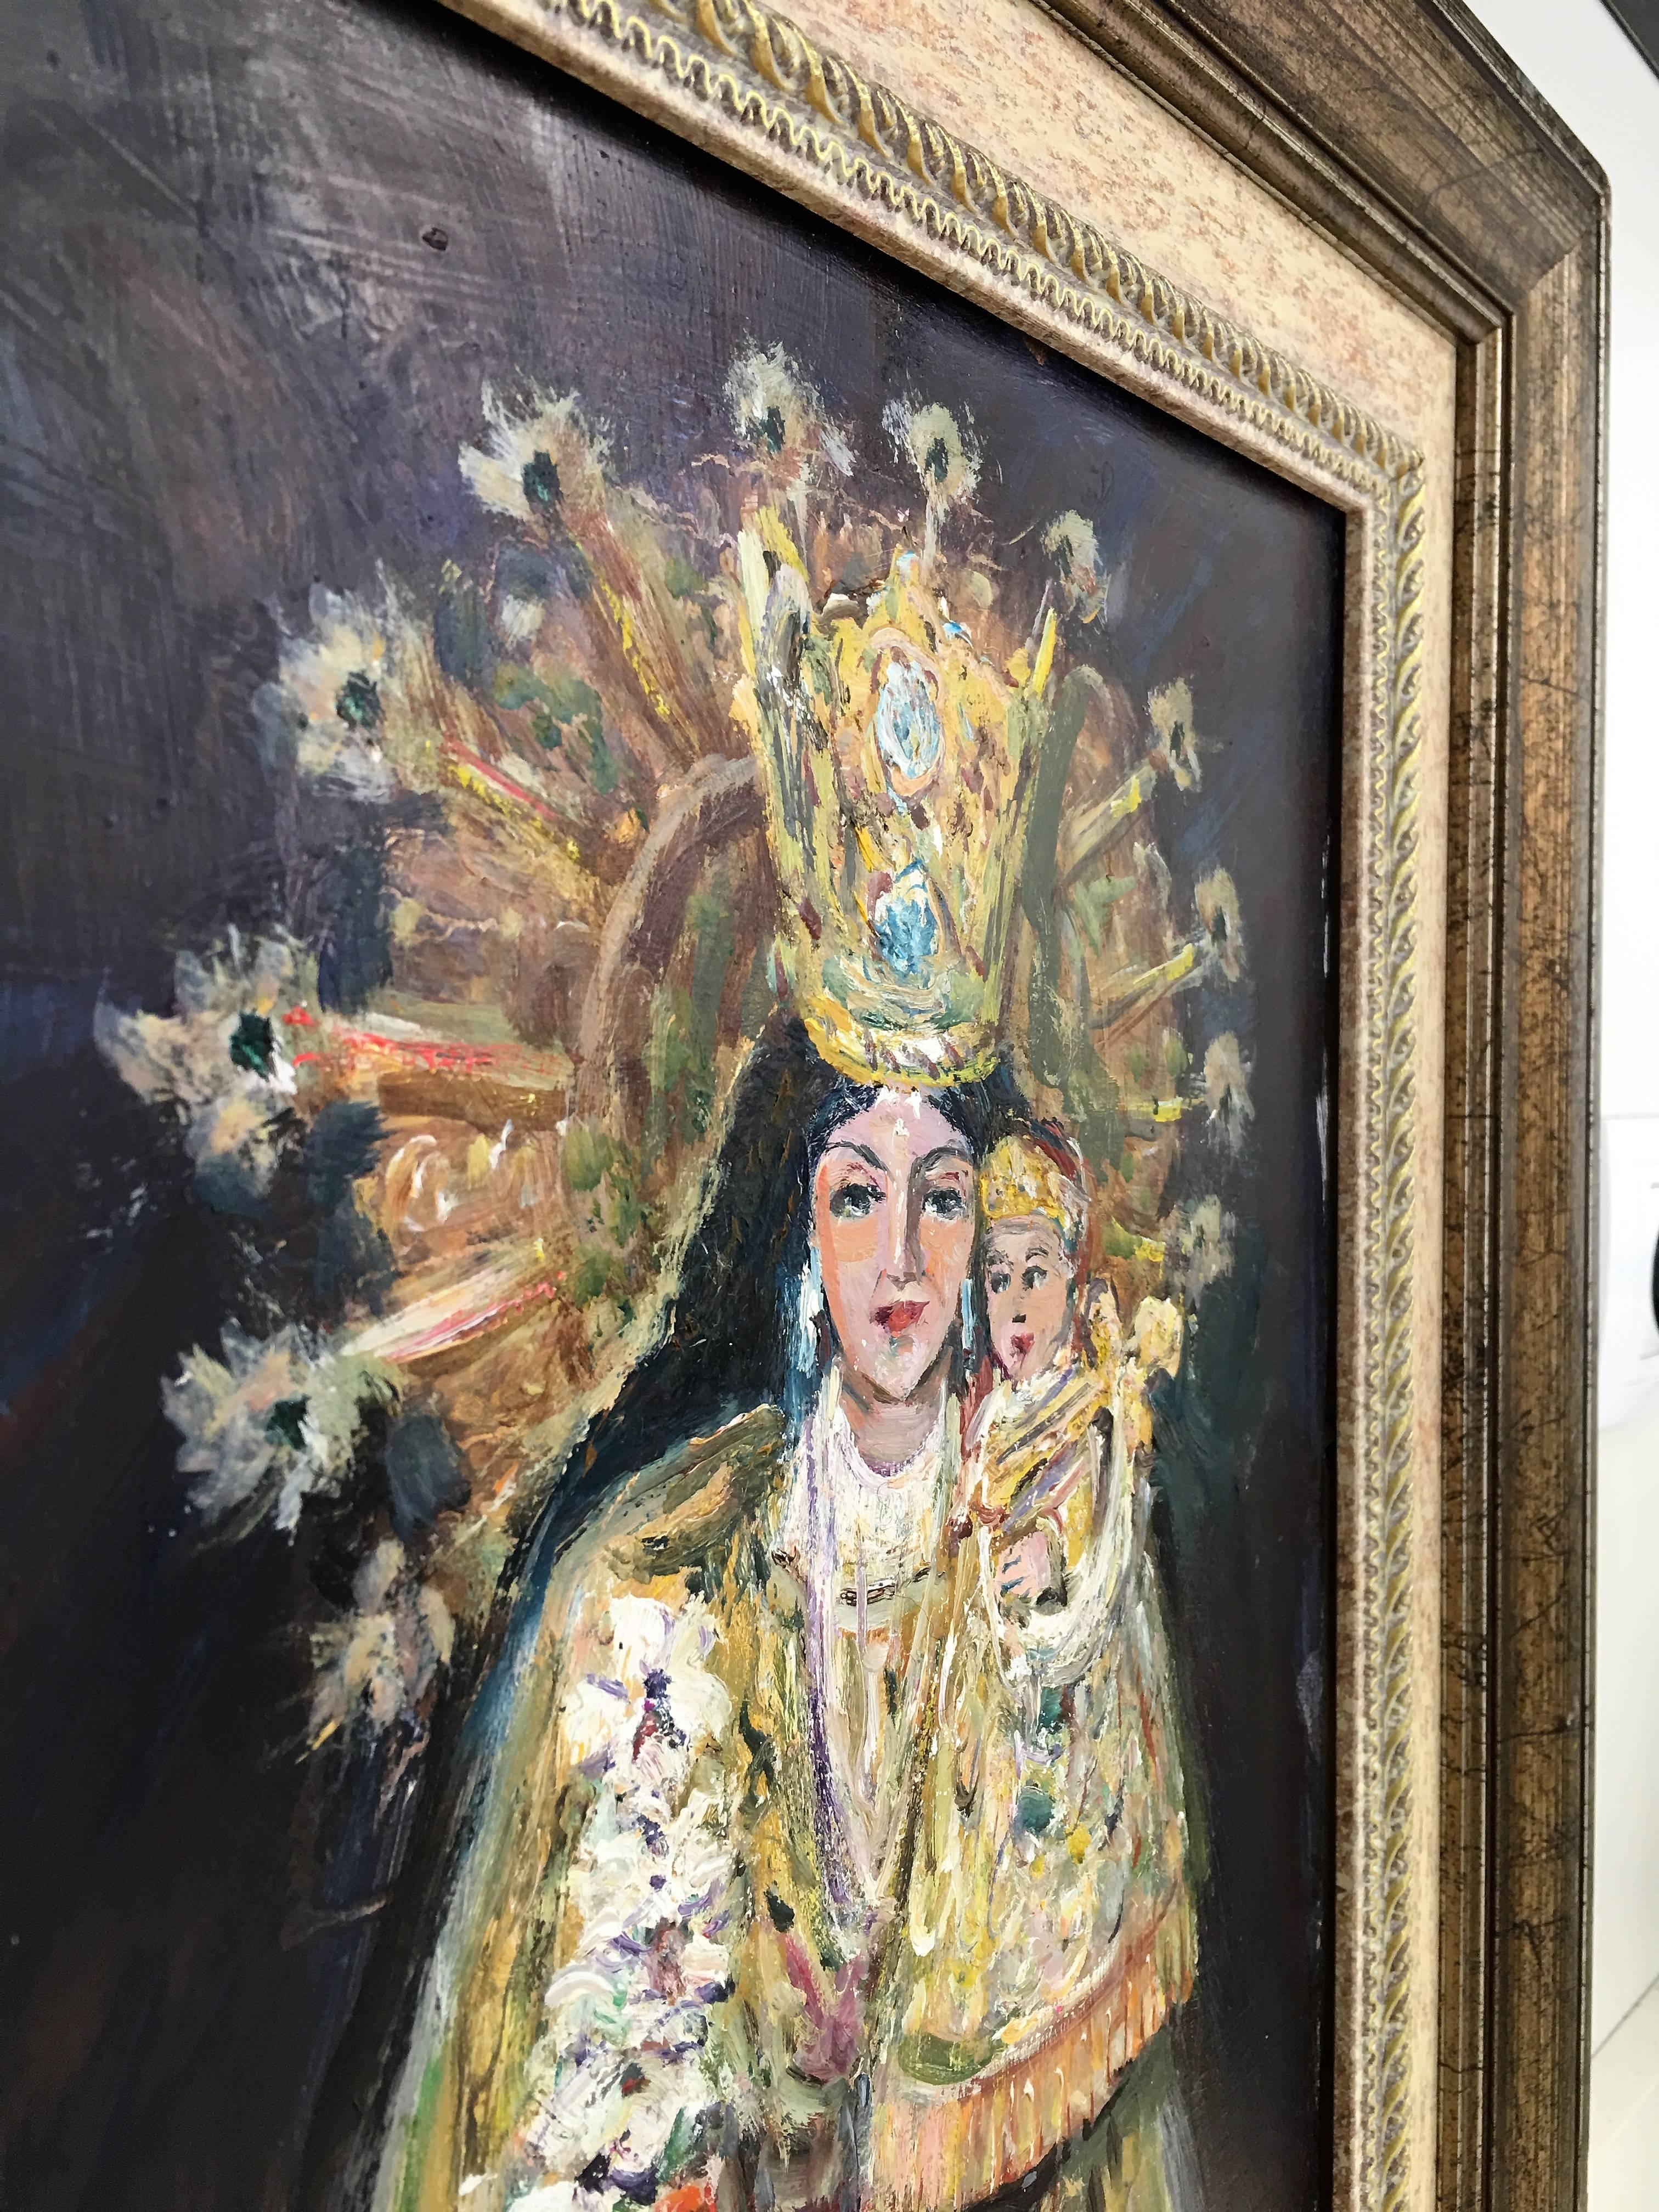 20th Century Oil Painting of Madonna and Child by Arnedo Linares, Spain (1925-2011)
This oil depicting the 